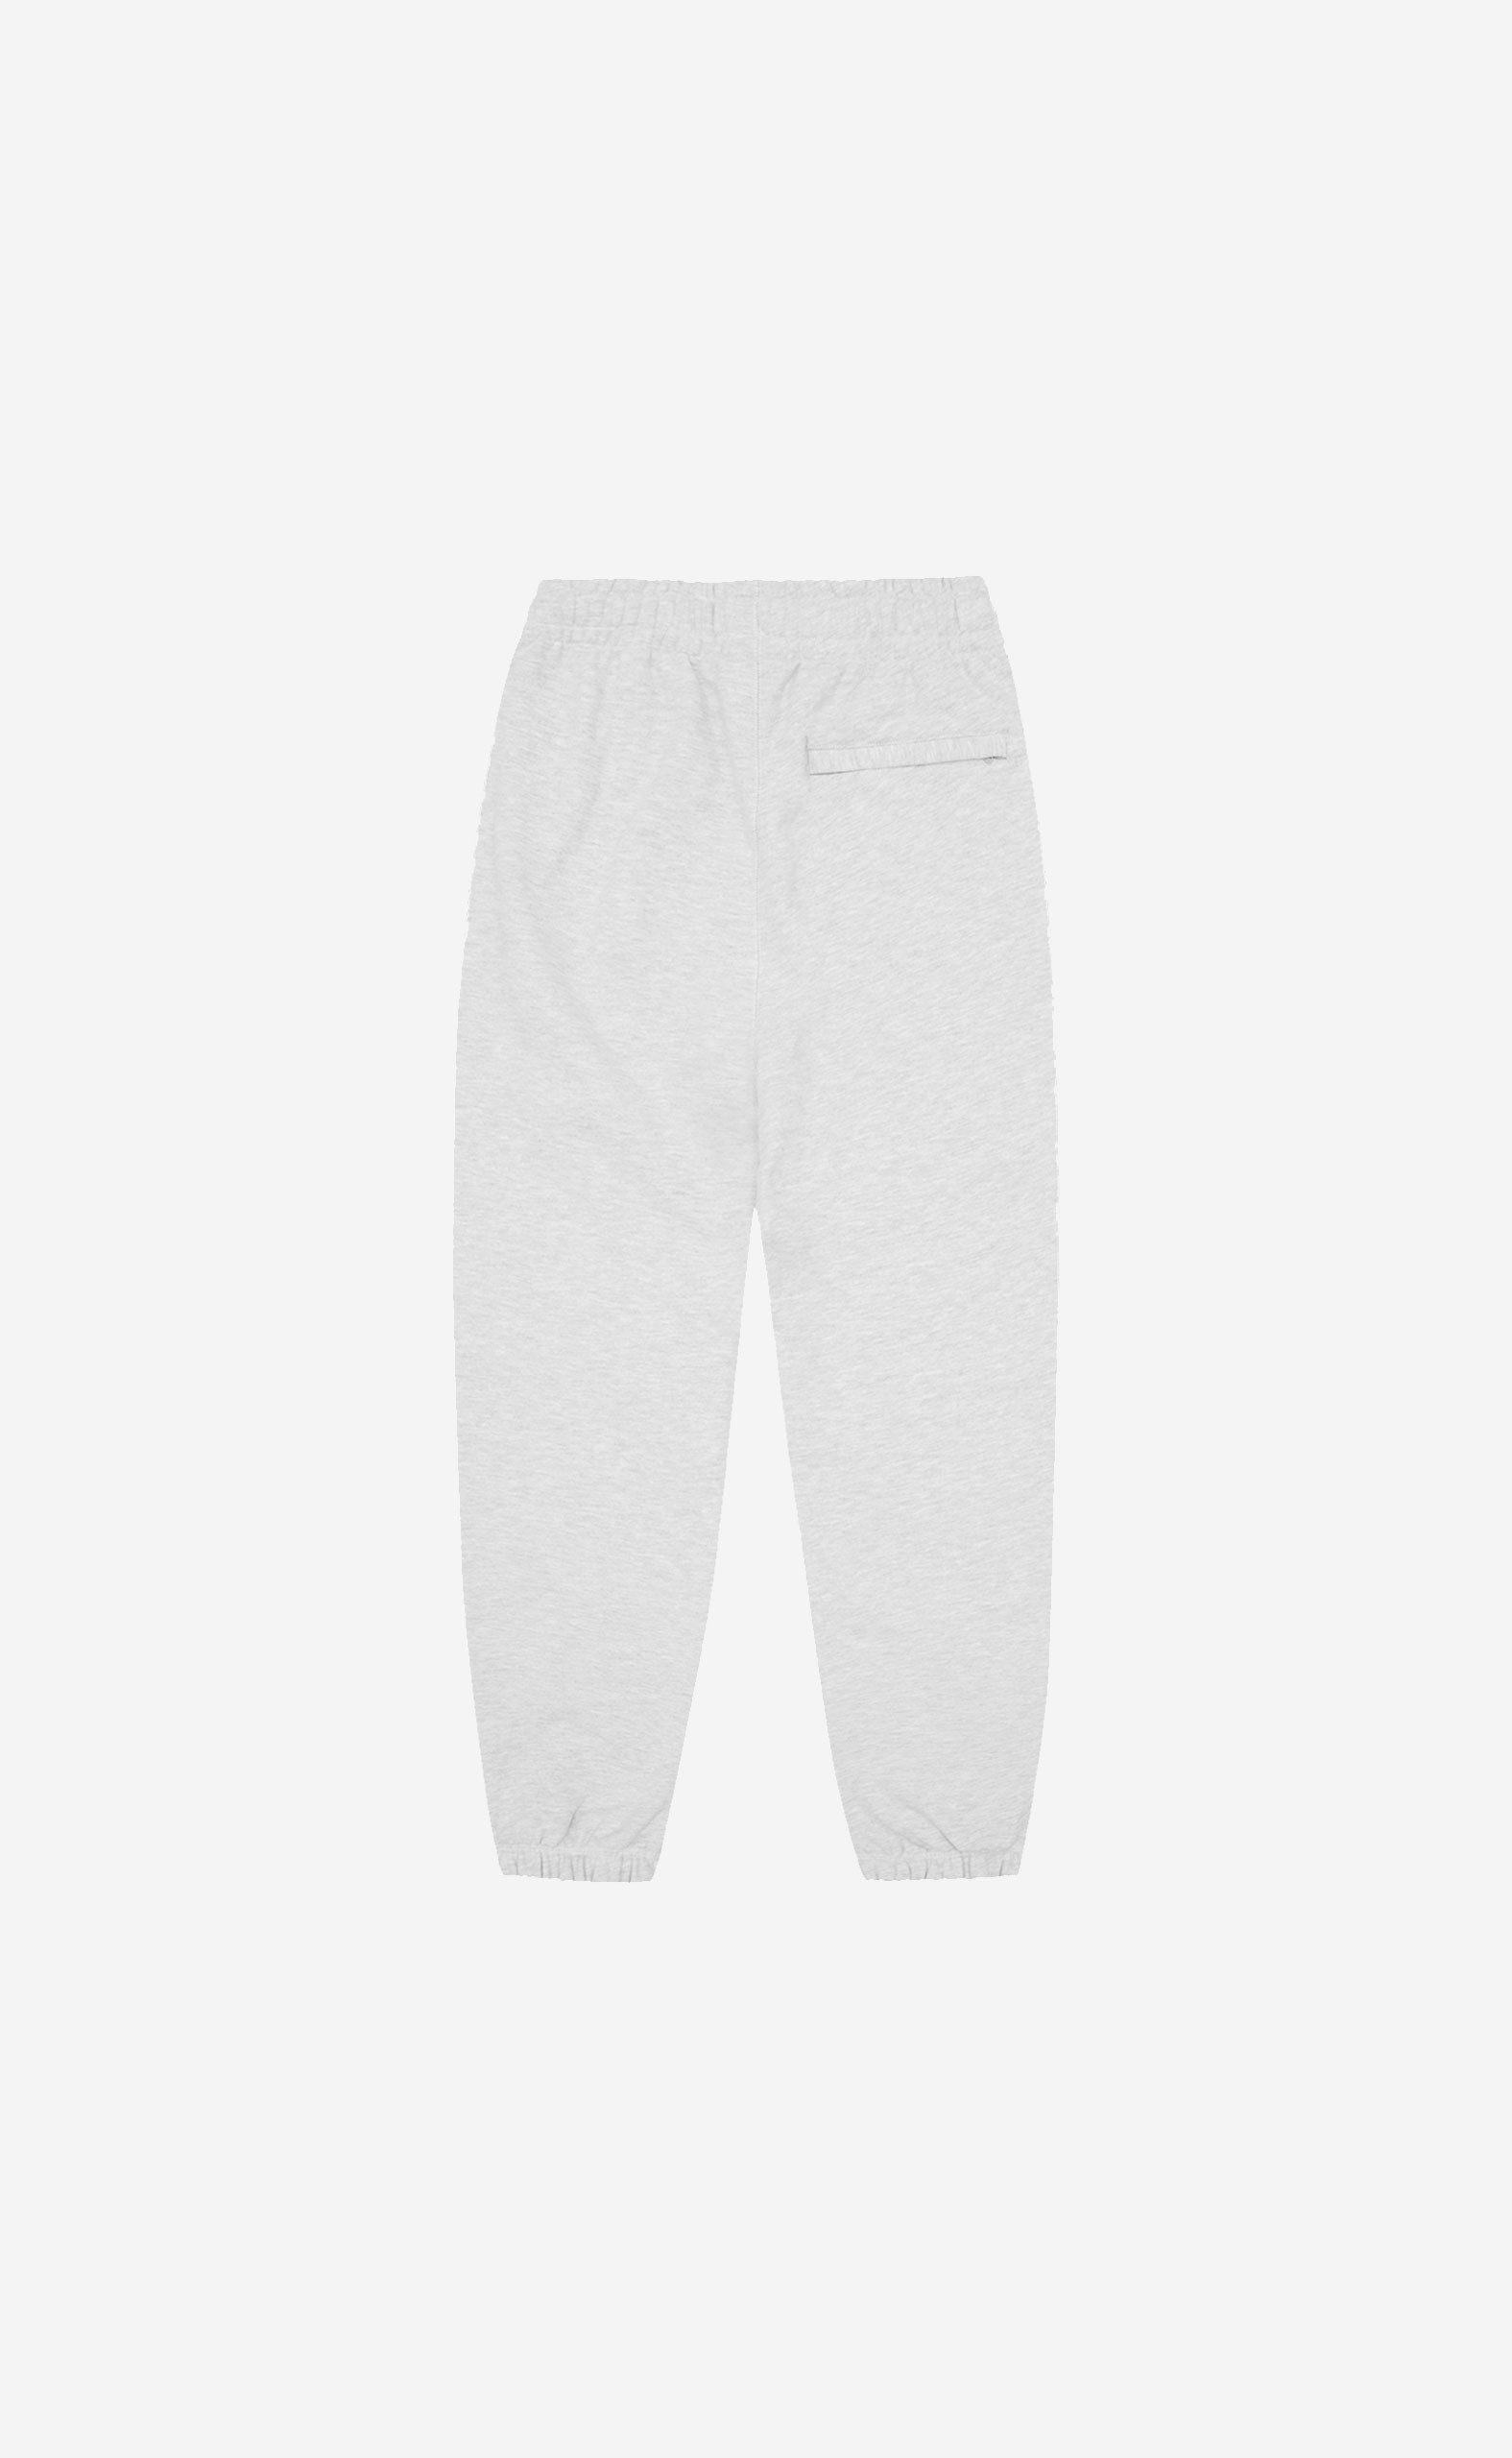 HEATHER ASH CALLIGRAPHY LOGO EMBROIDERED SWEATPANTS